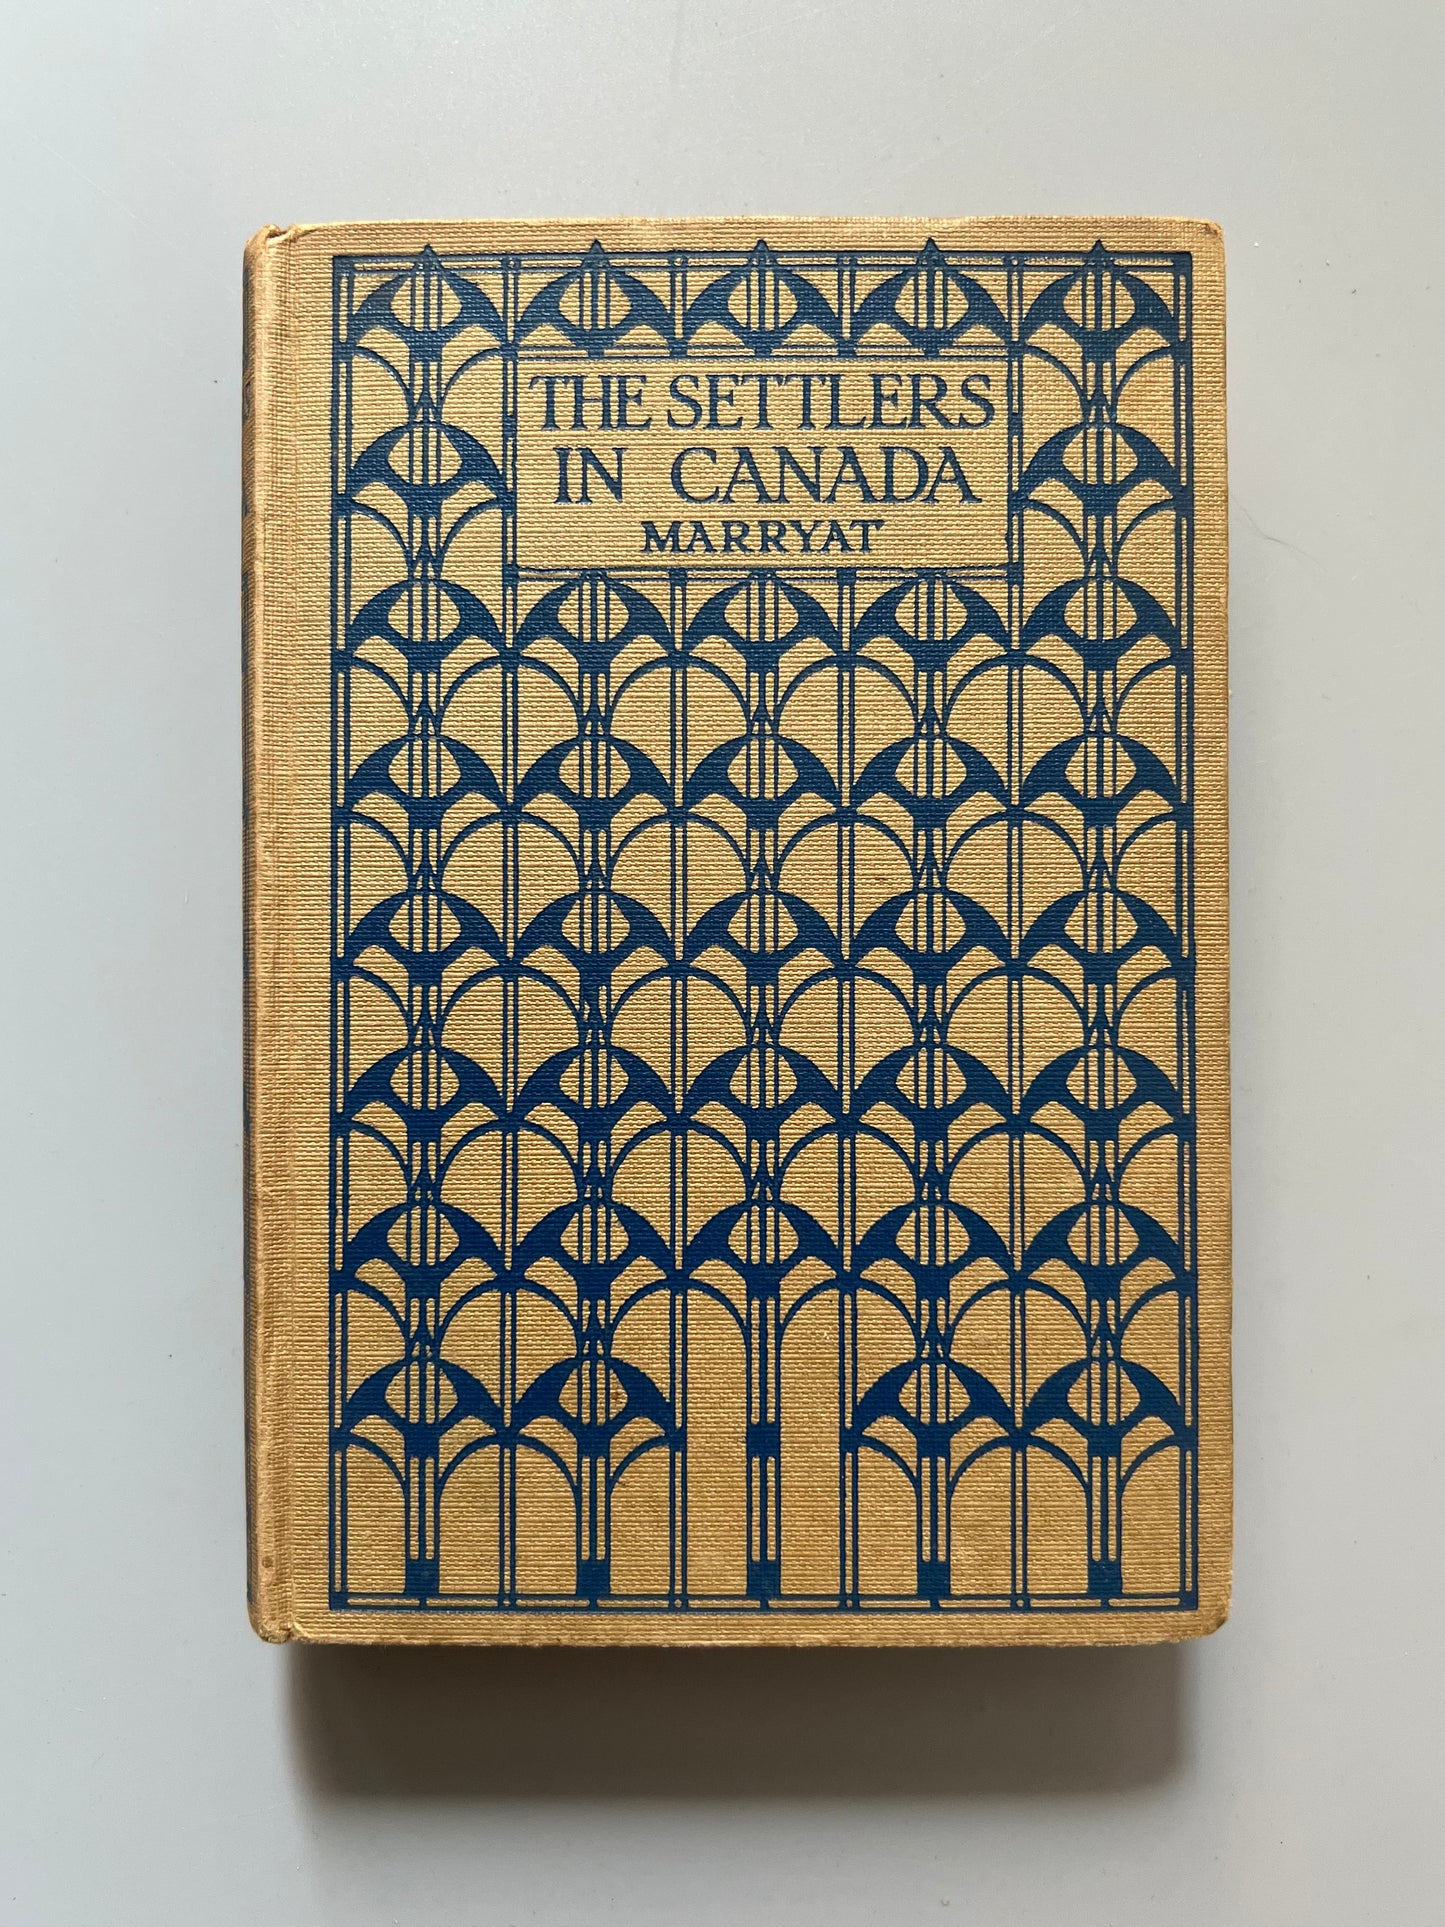 The Settlers in Canada, Frederick Marryat - Londres/ Glasgow: Blackie & Son, ca. 1920